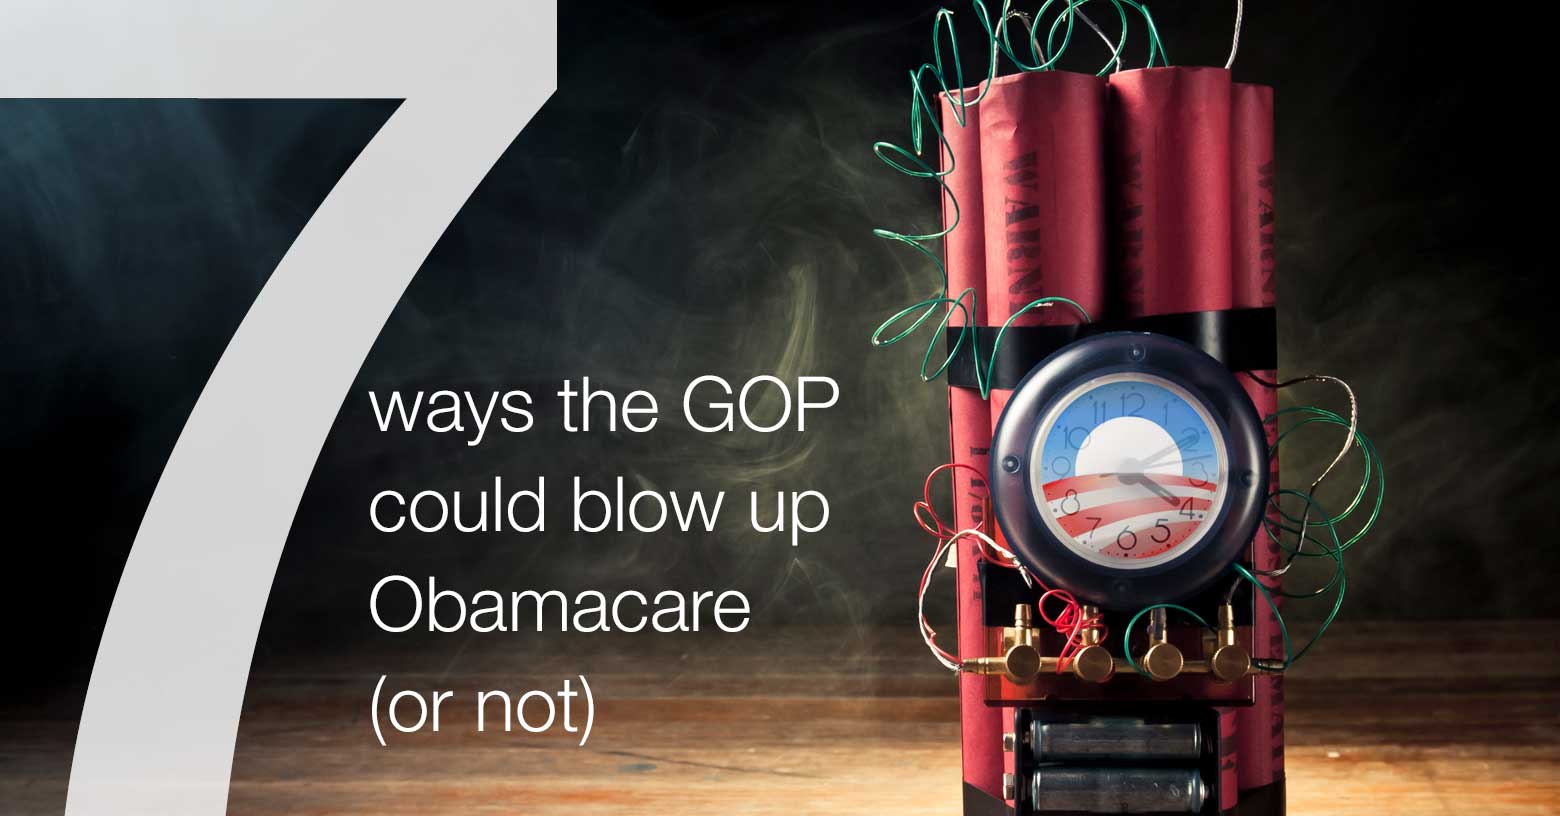 7 ways the GOP could blow up Obamacare